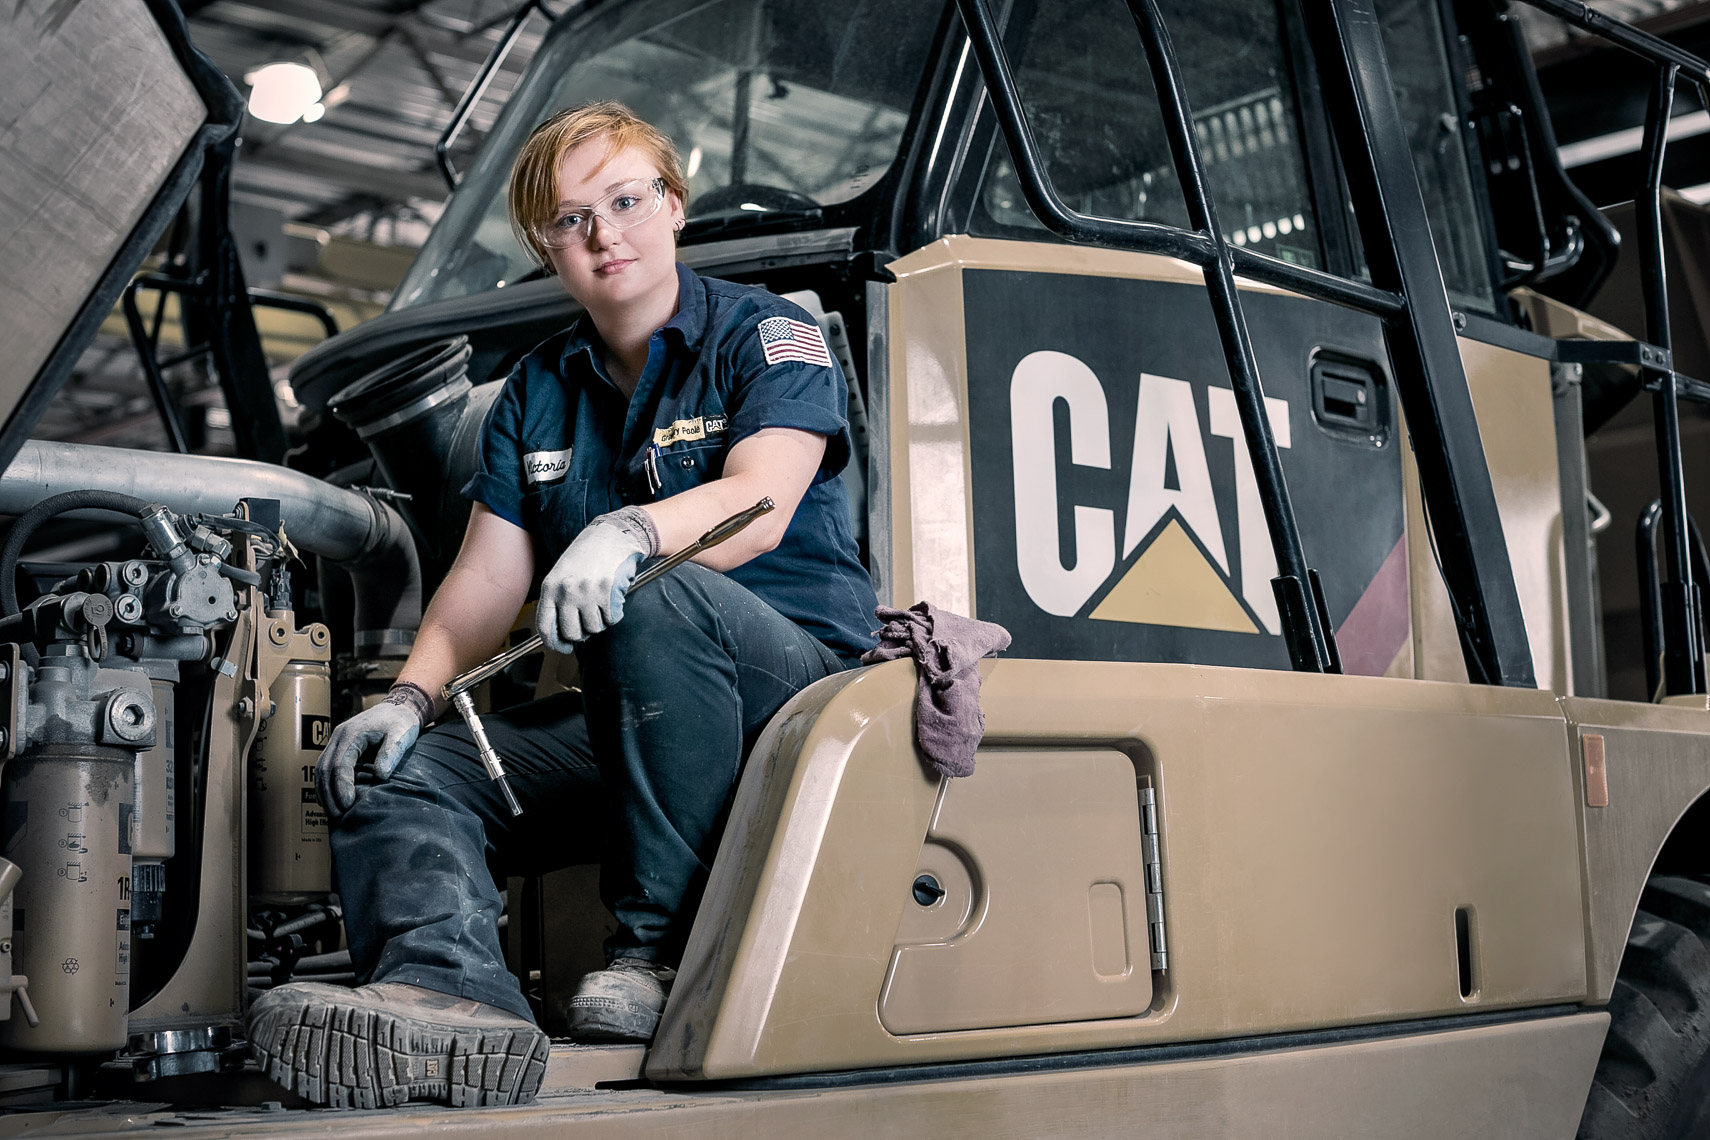 Service_Technicians_for_Gregory_Poole_20190904_photo_by_Justin_Kase_Conder_2783_Retouched_V01_CAT.JPG